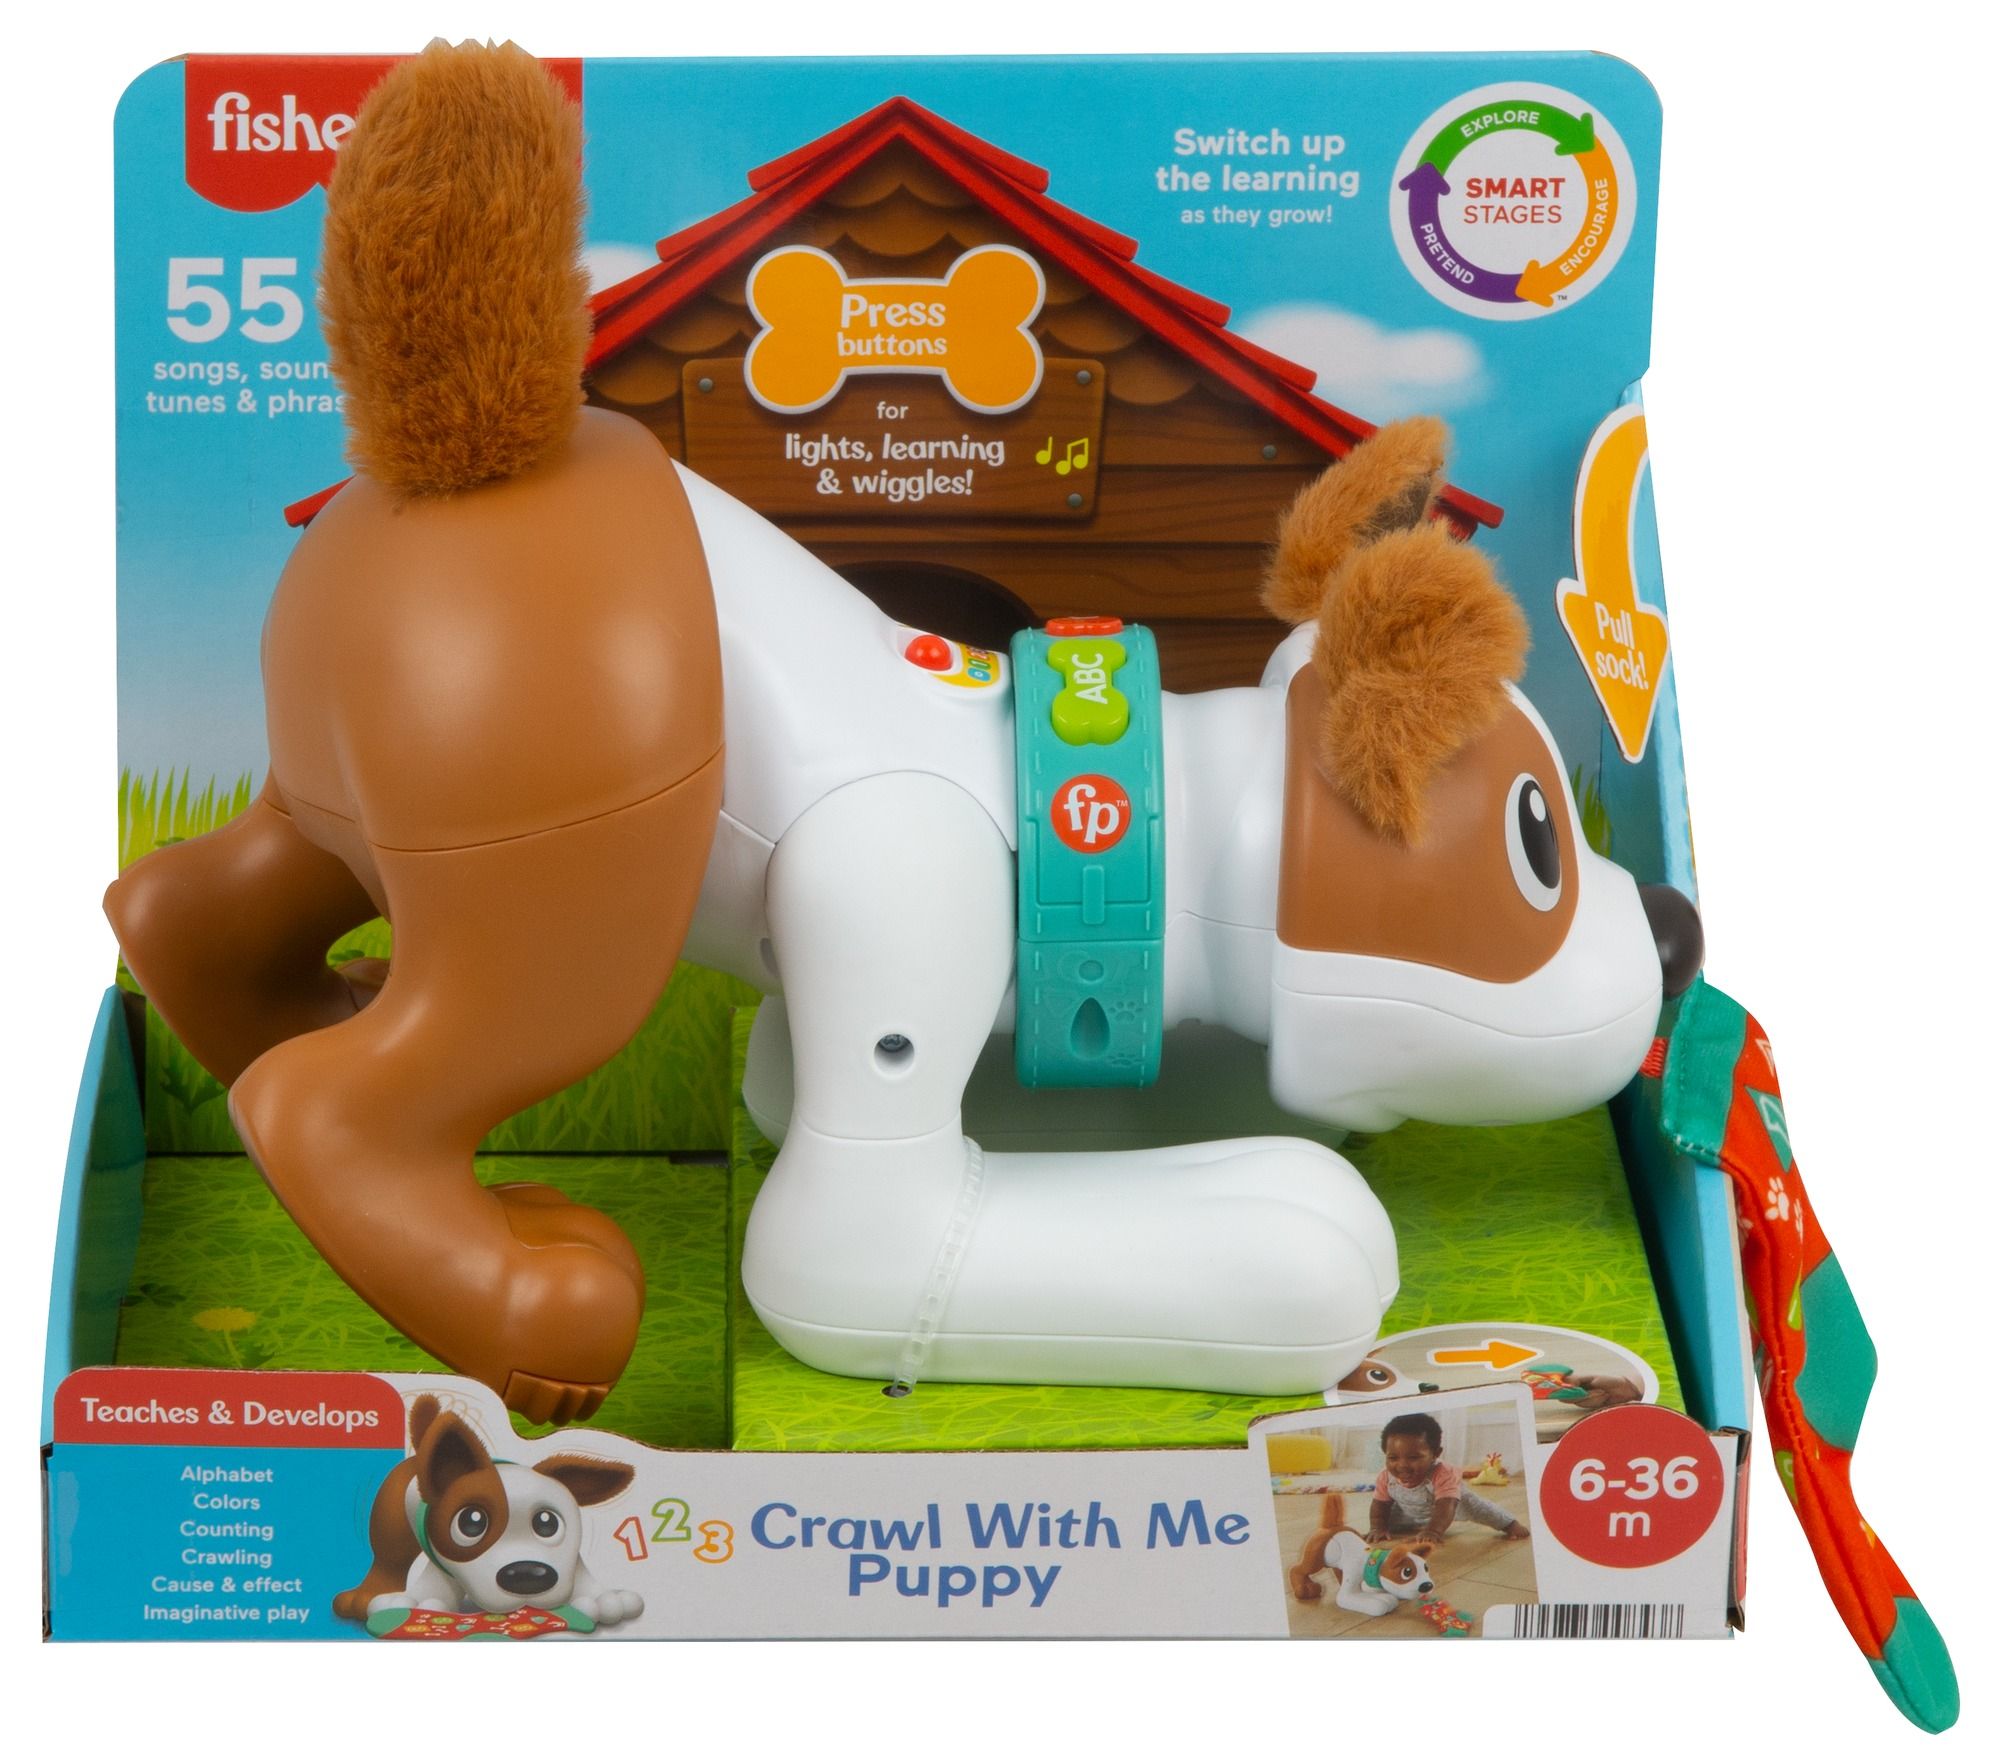 An image of Fisher Price 123 Crawl With Me Puppy